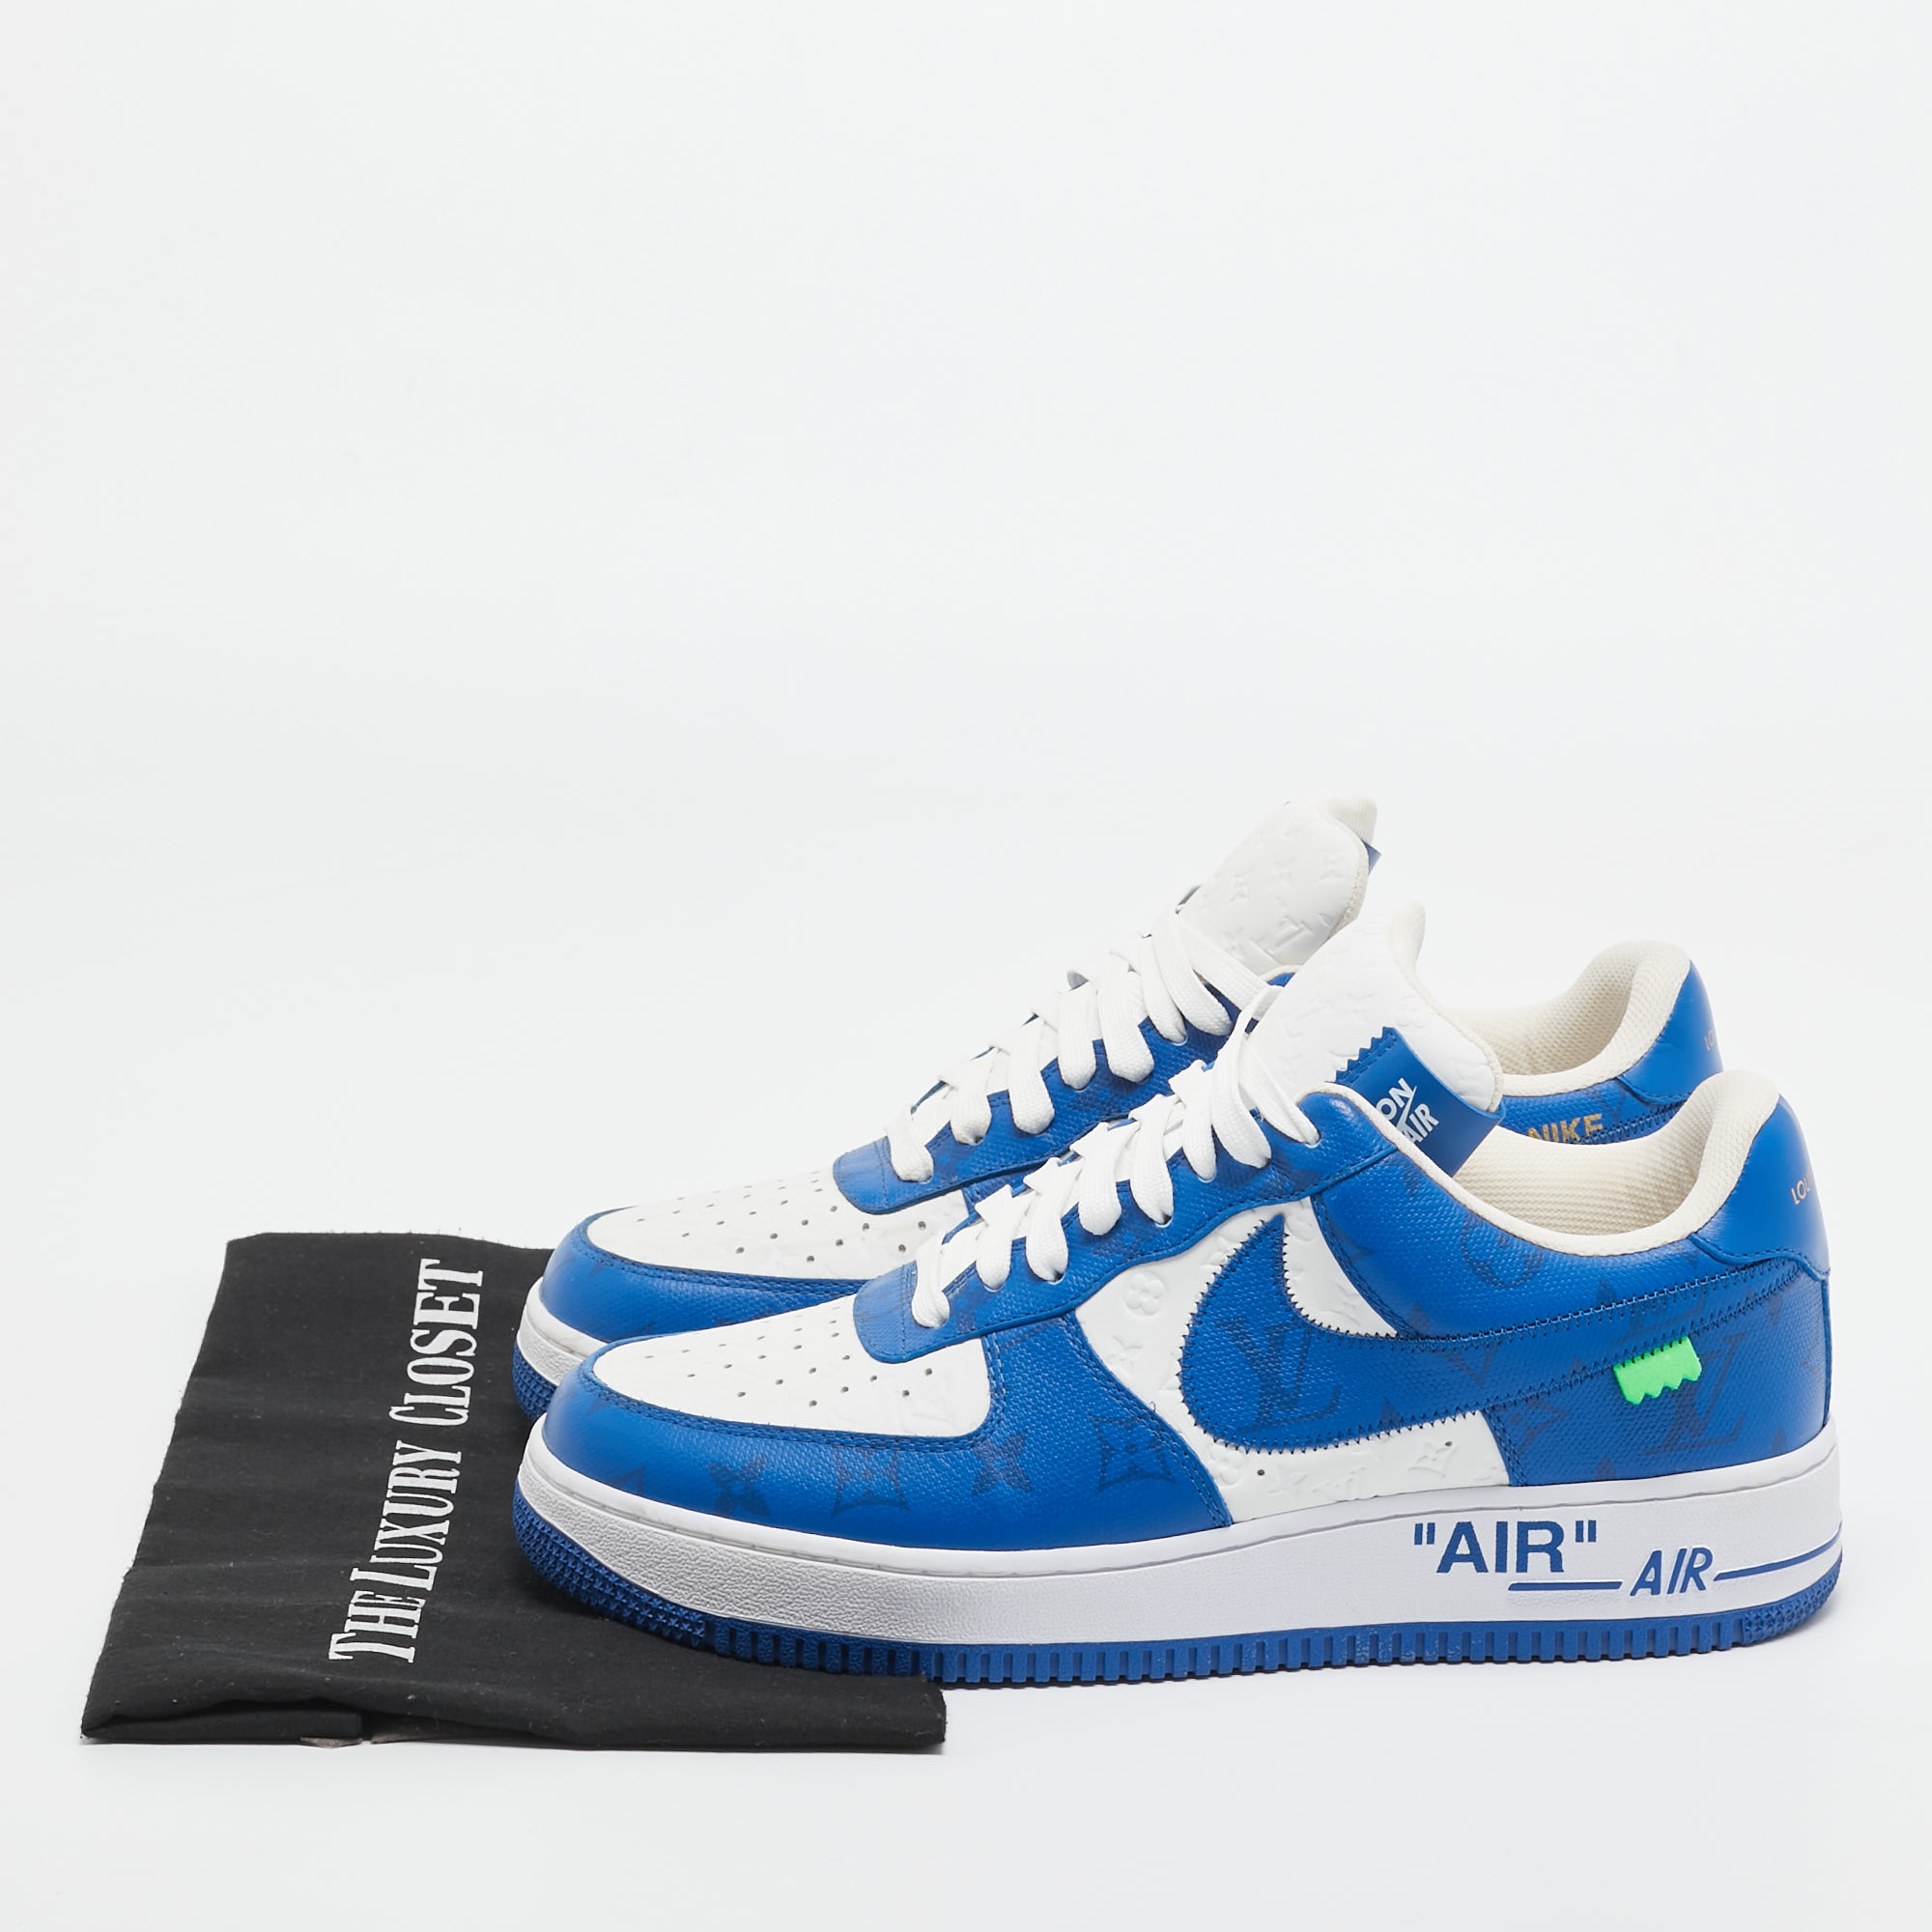 Louis Vuitton X Nike Blue/White Leather Nike Air Force 1 Low Top Sneakers Size 42